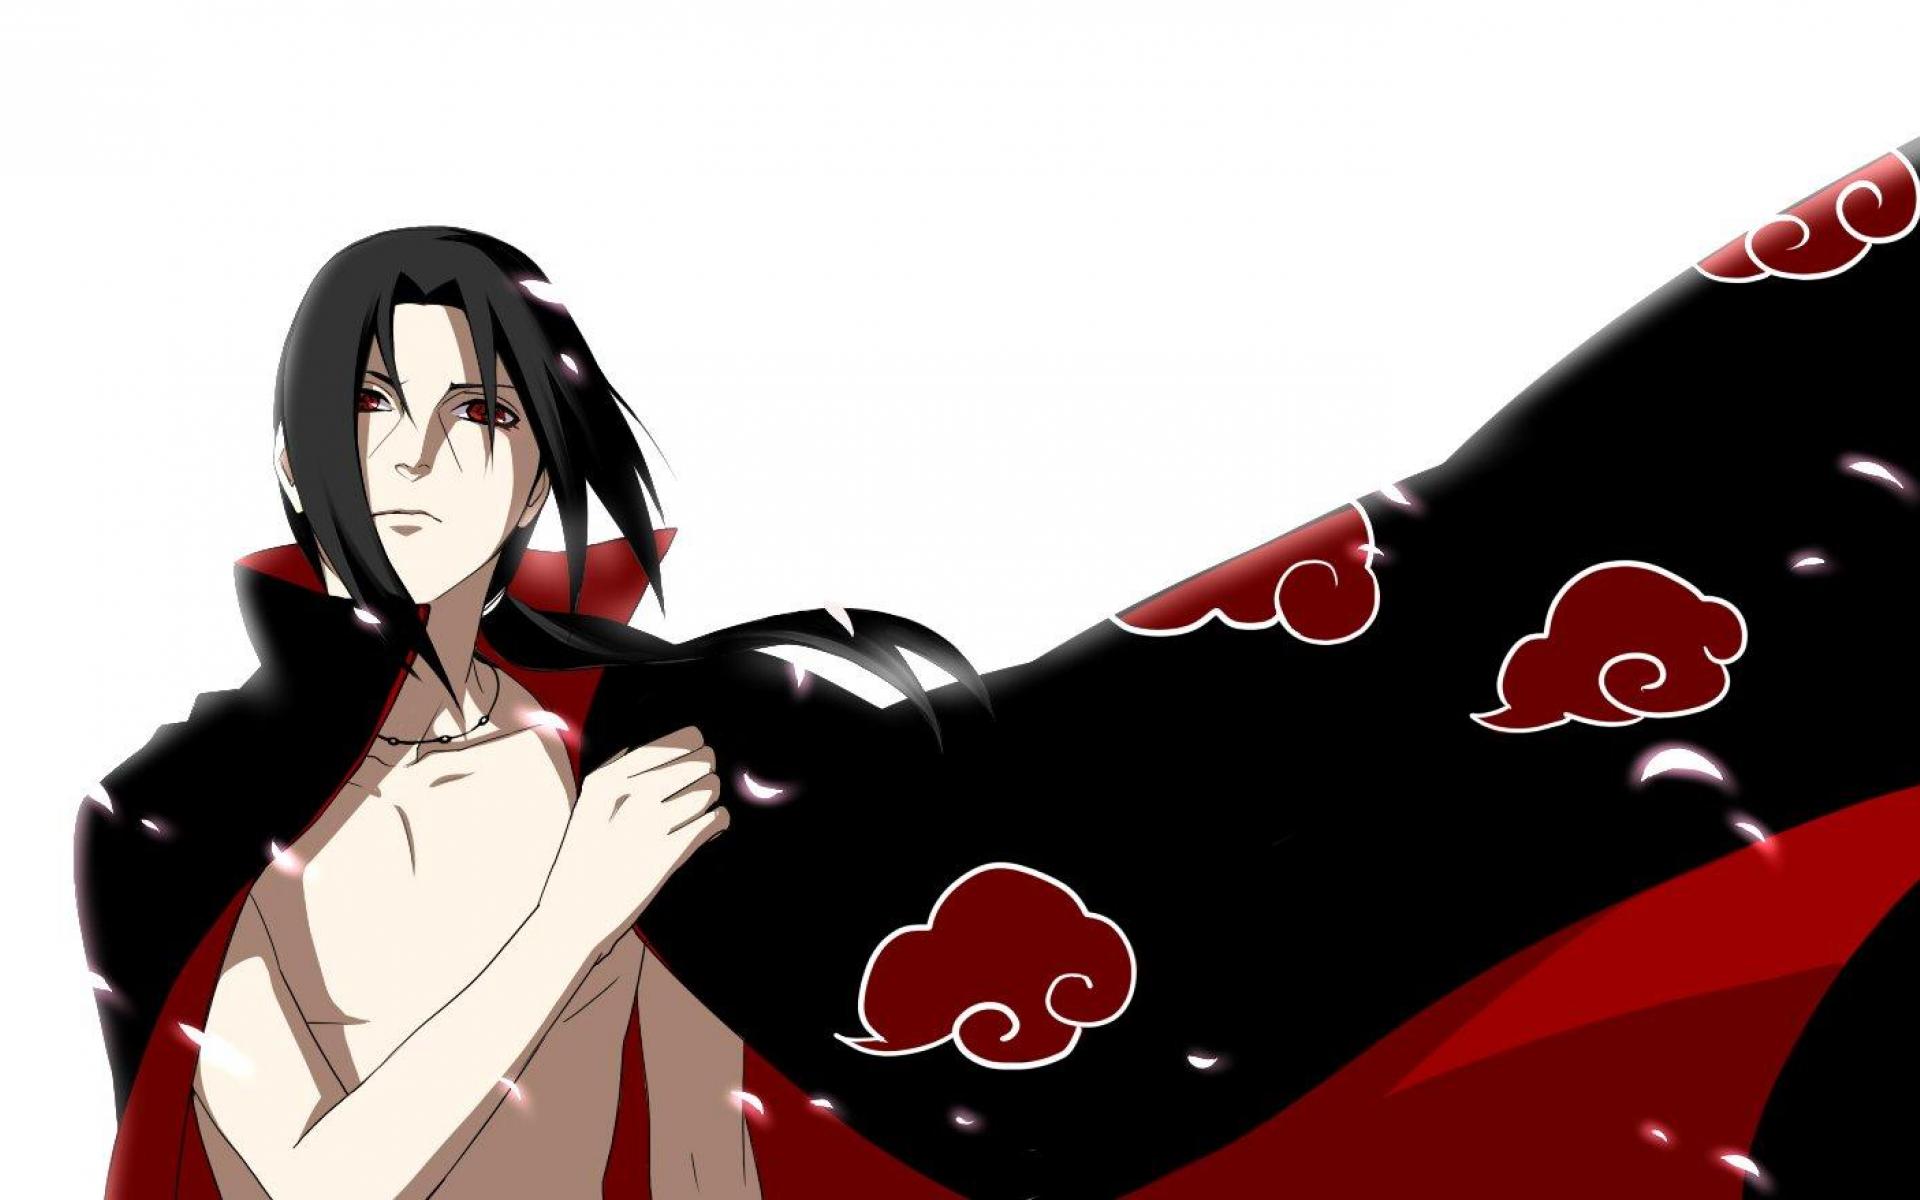 Itachi 4K wallpaper for your desktop or mobile screen free and easy to download